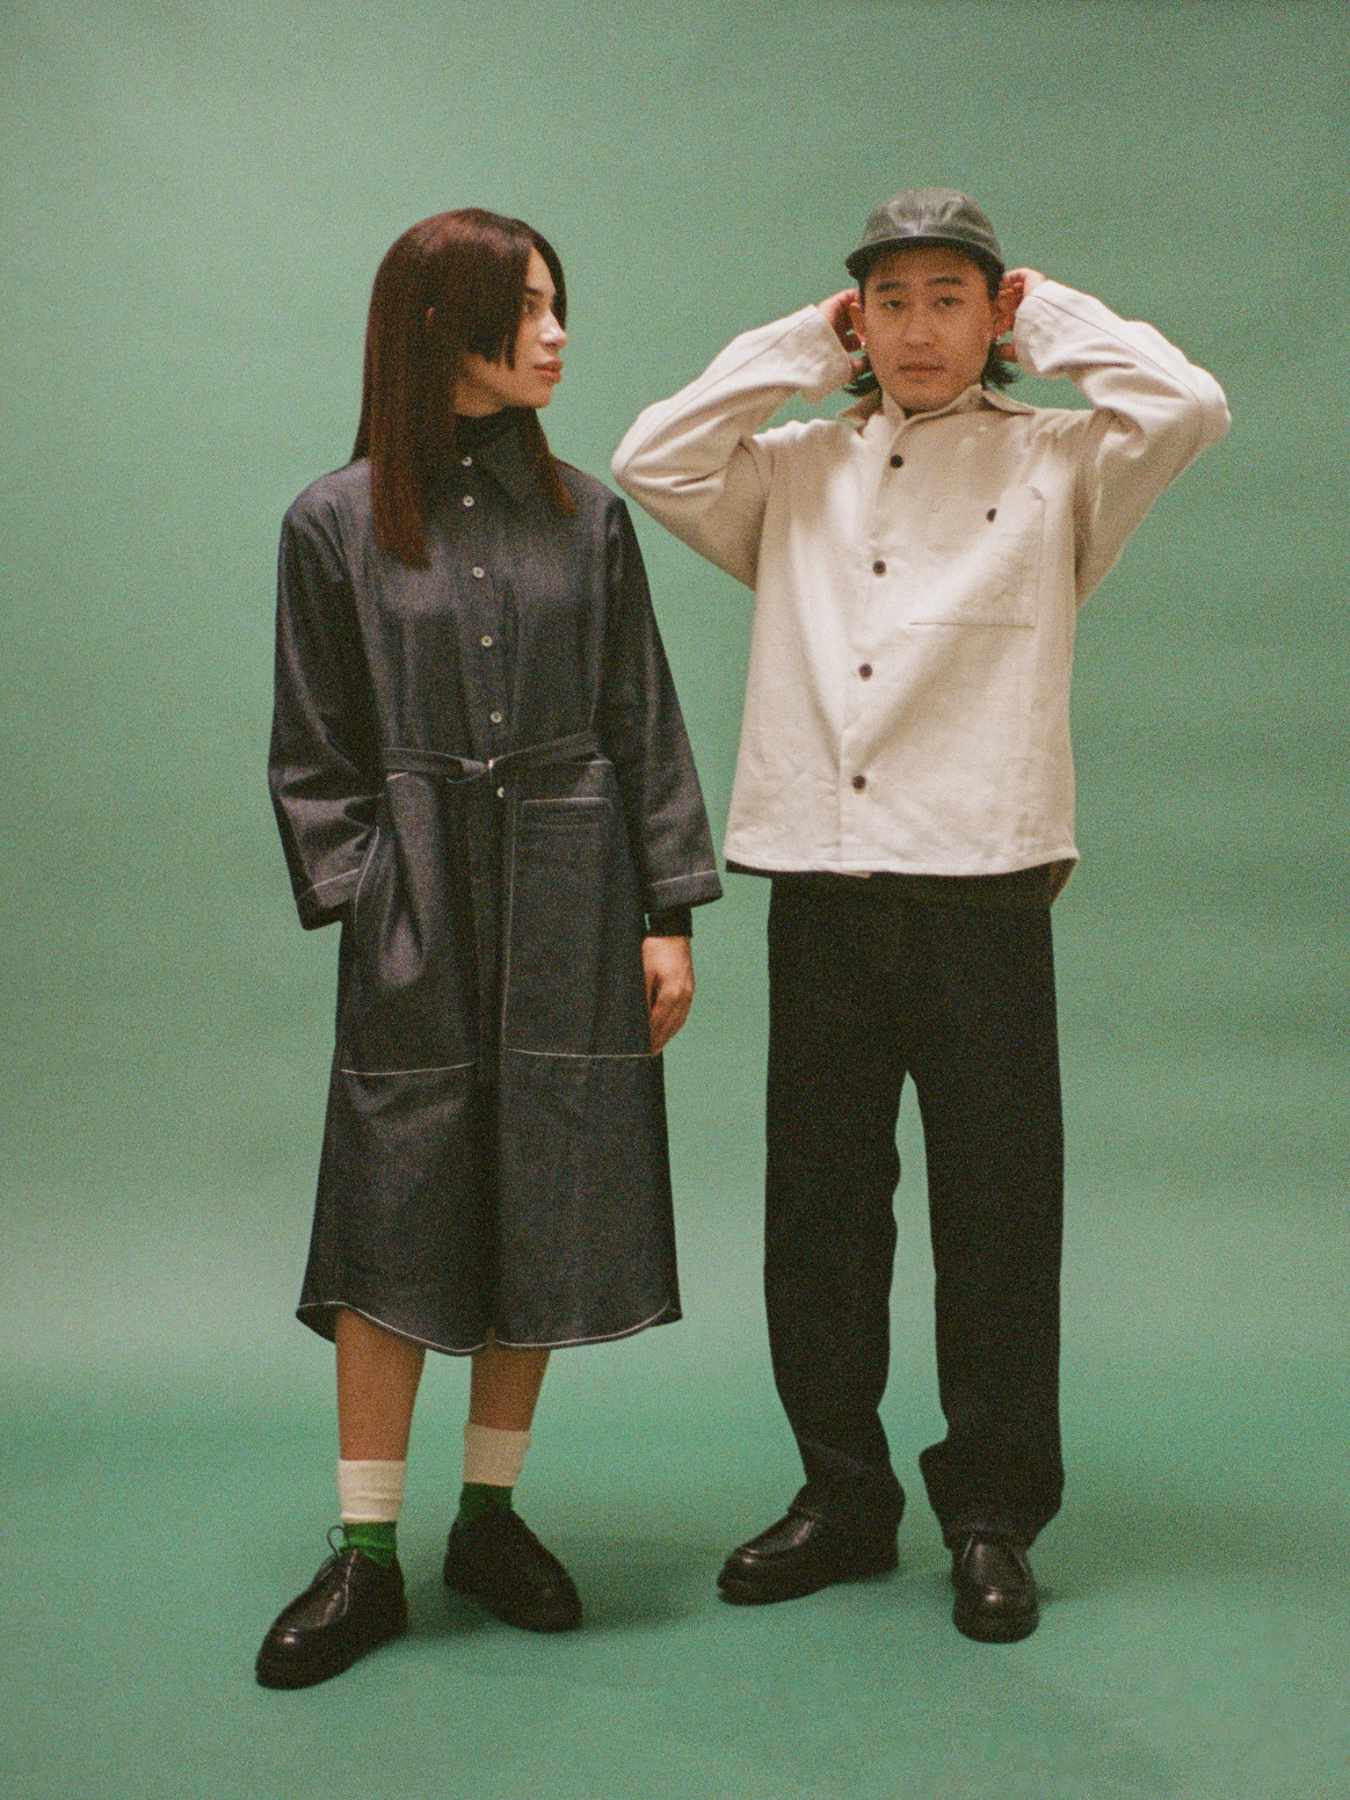 Models wear Namu Shop's Fall/Winter 2023 clothing collections in a green-themed editorial